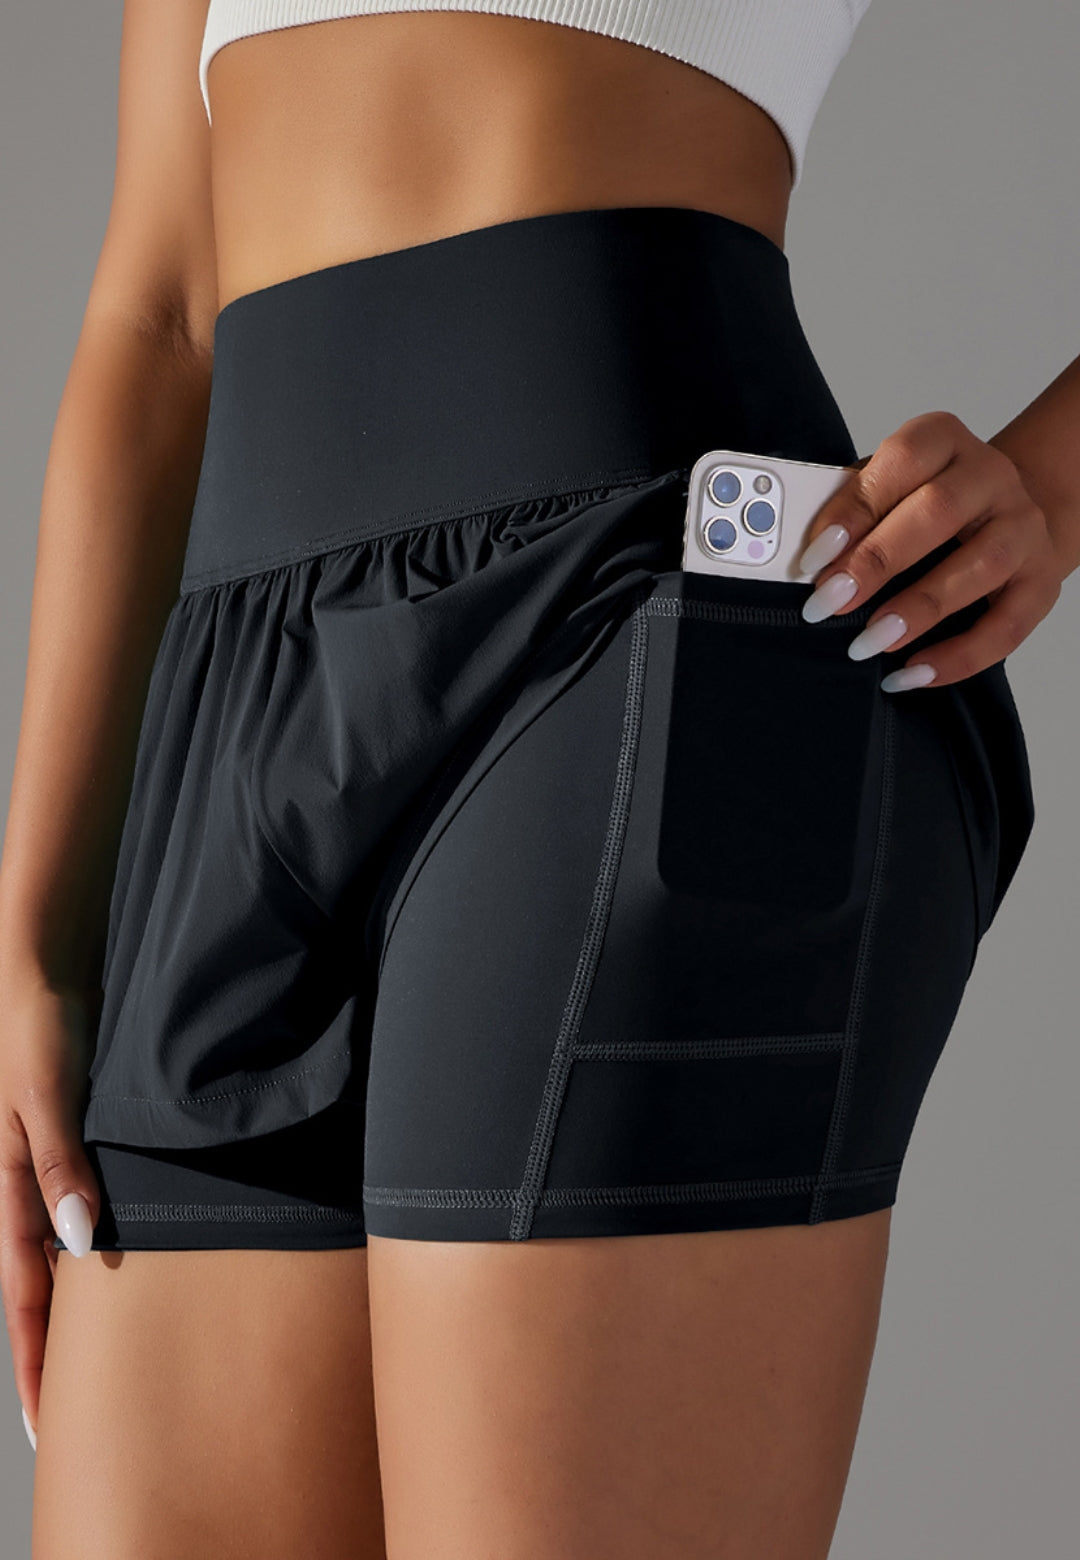 Model showing cell phone in the pocket of High Waist Ruffle Shorts